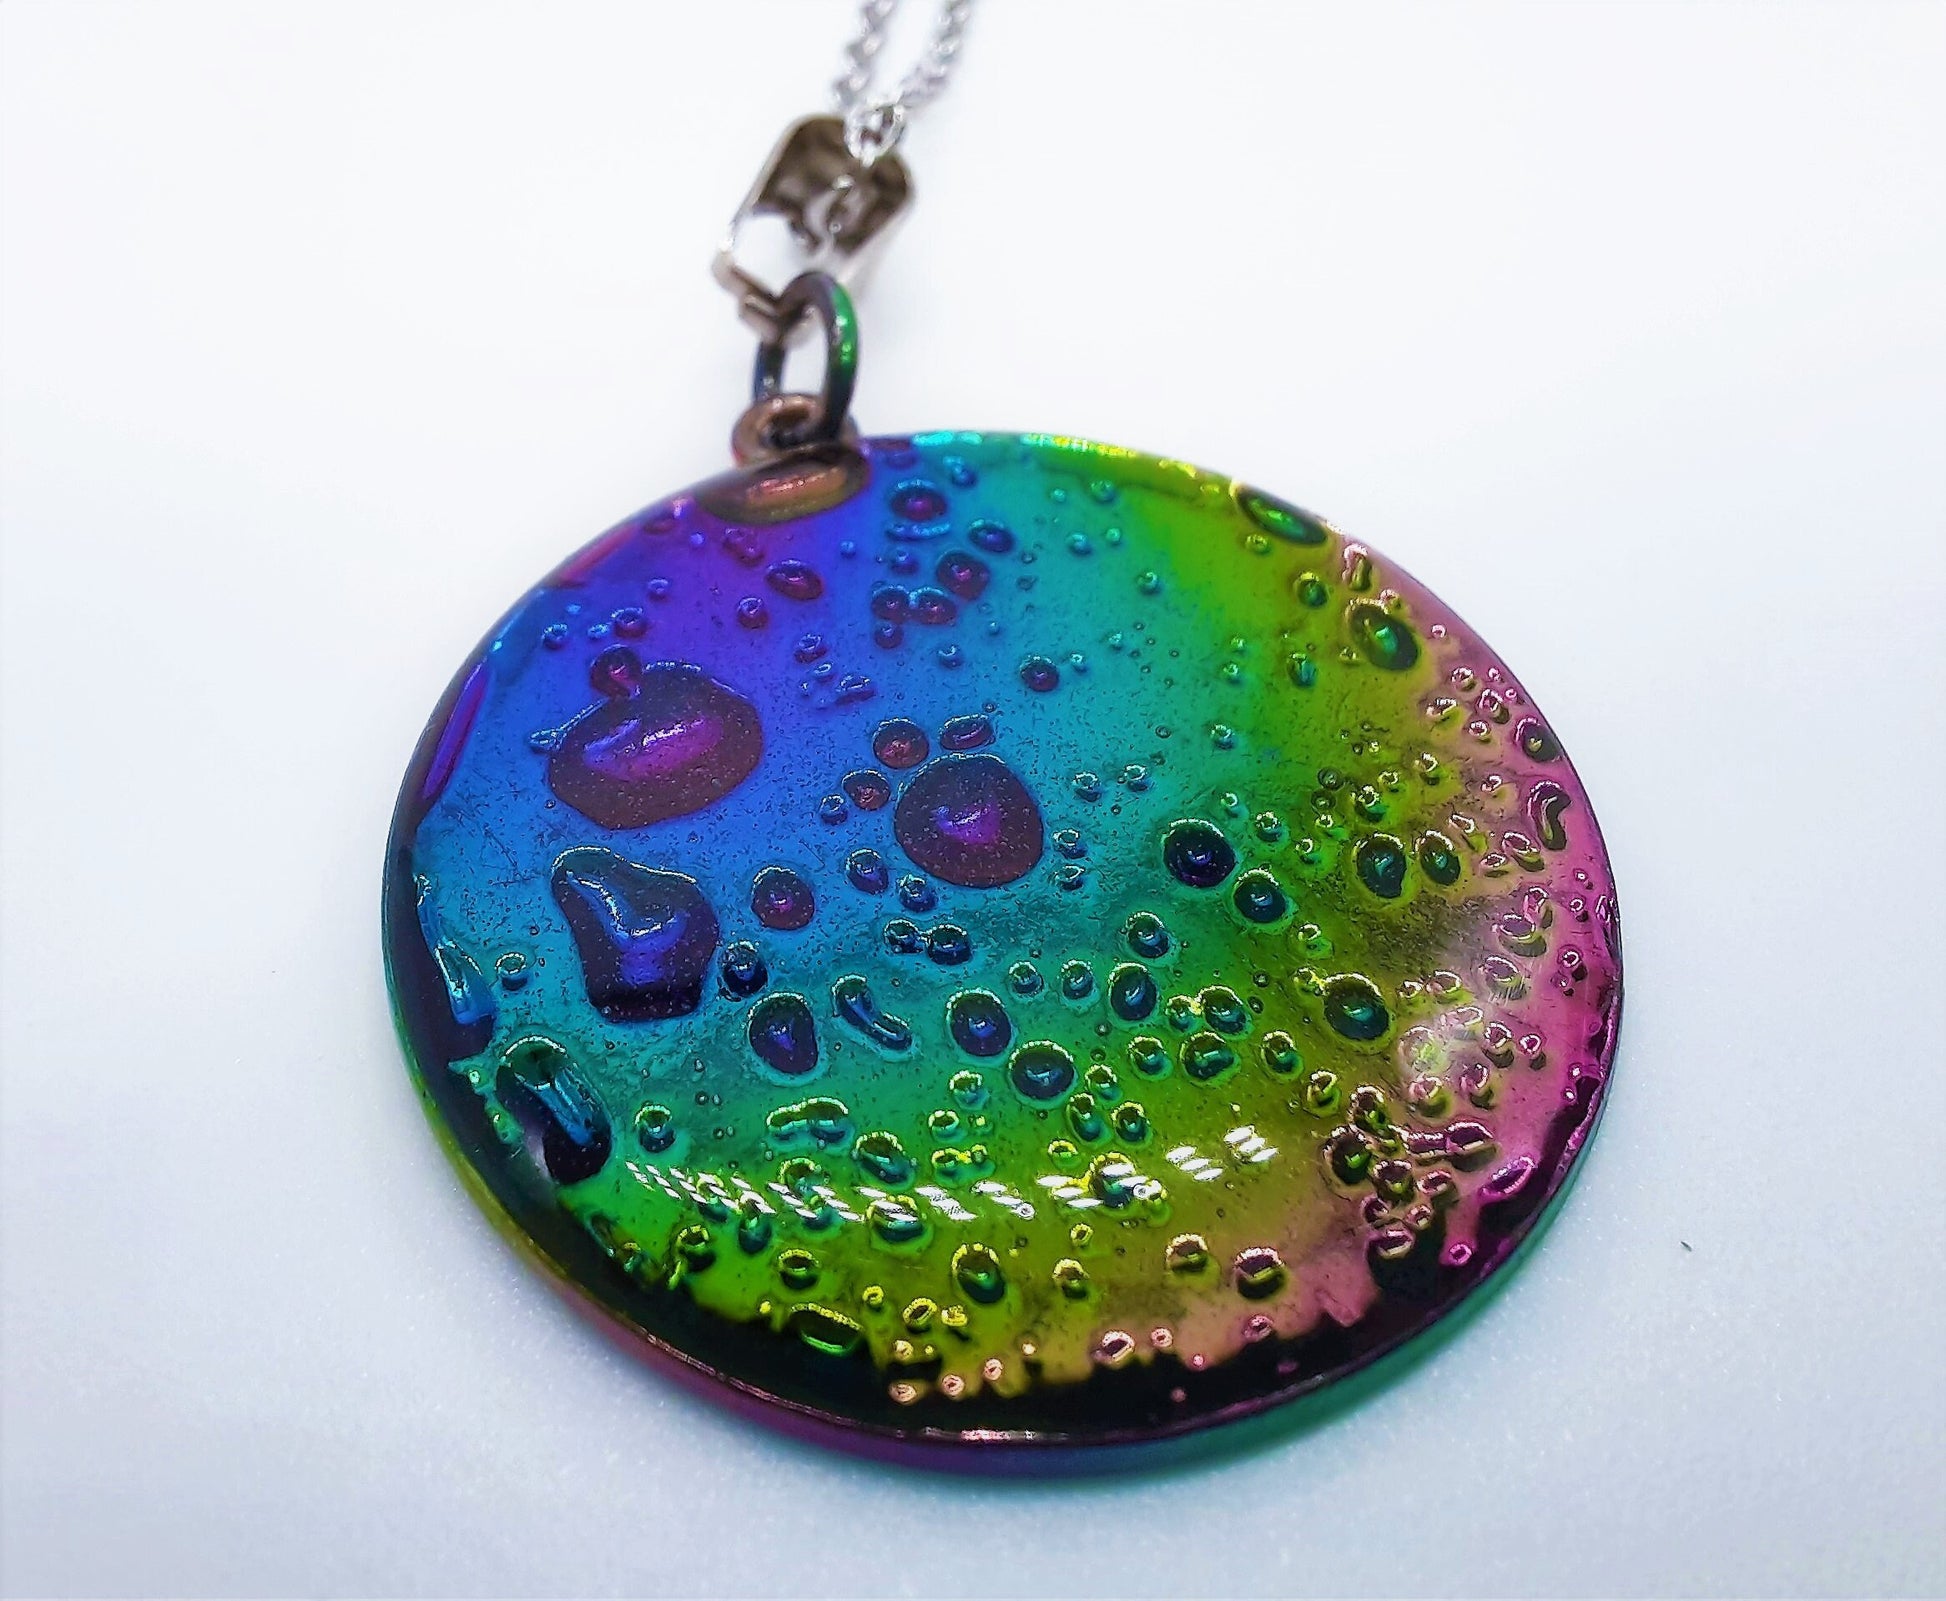 Rainbow Chromium Stainless Steel Moon Pendant Necklace - Hypoallergenic 18" Silver Chain - Covered with Holographic Powder Infused Resin